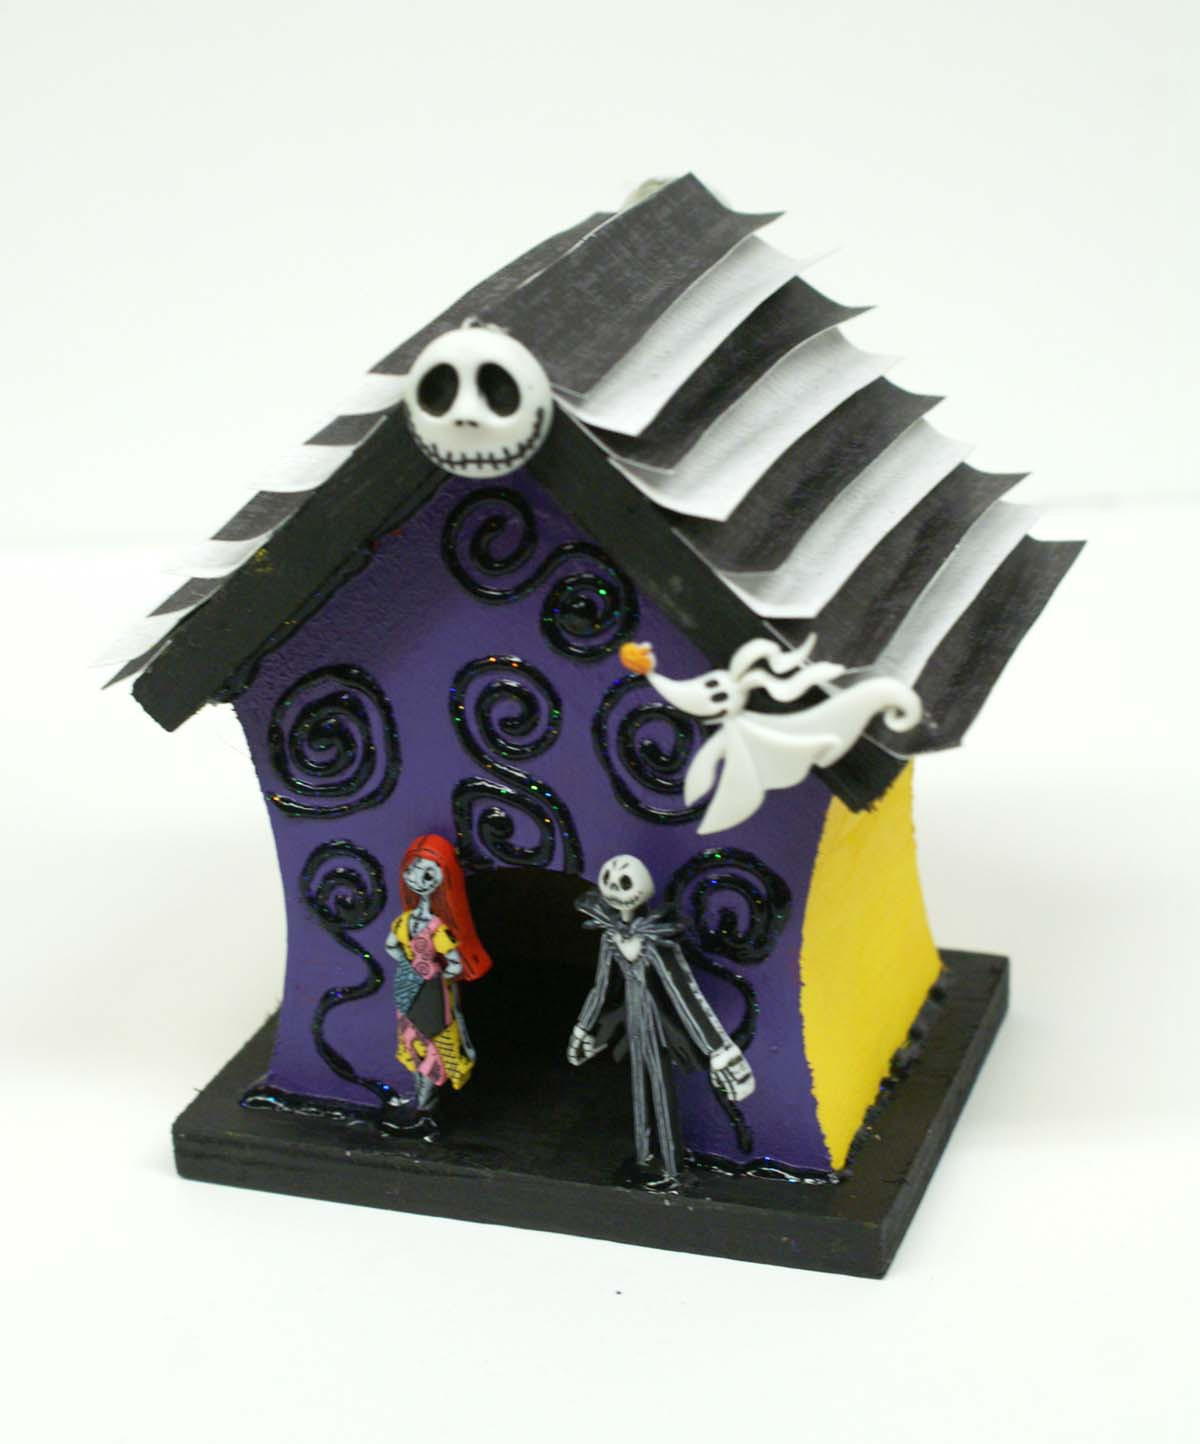 DIY Nightmare Before Christmas Decorations
 Ben Franklin Crafts and Frame Shop DIY Nightmare Before